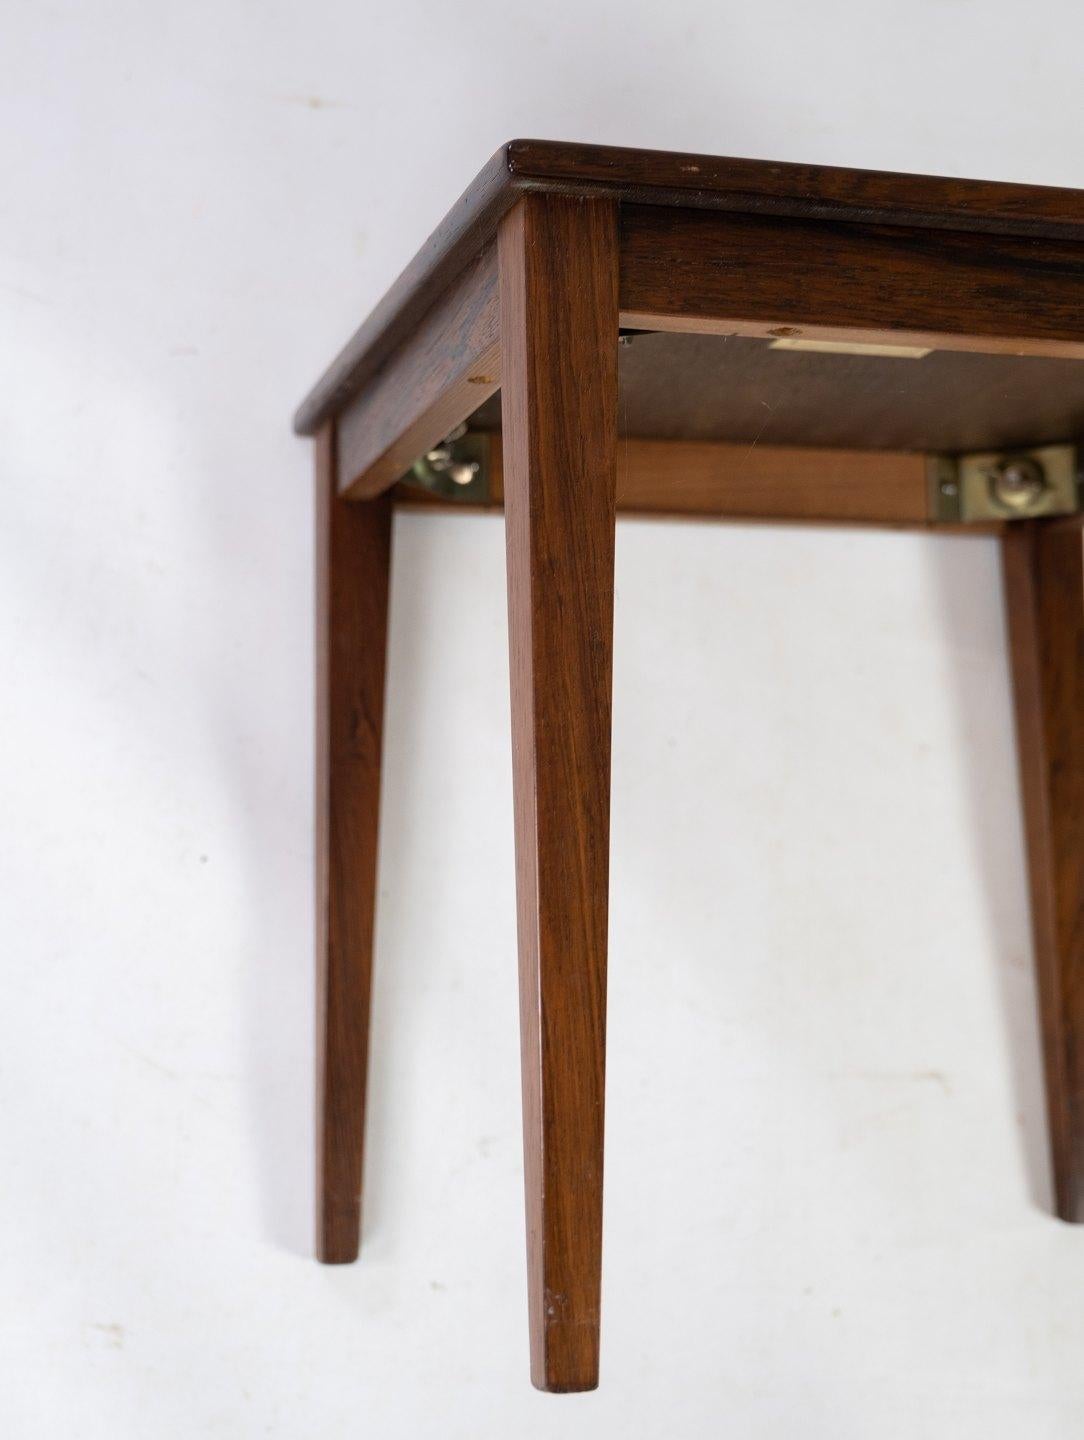 Mid-20th Century Side Table Made In Rosewood, Danish Design From 1960s For Sale